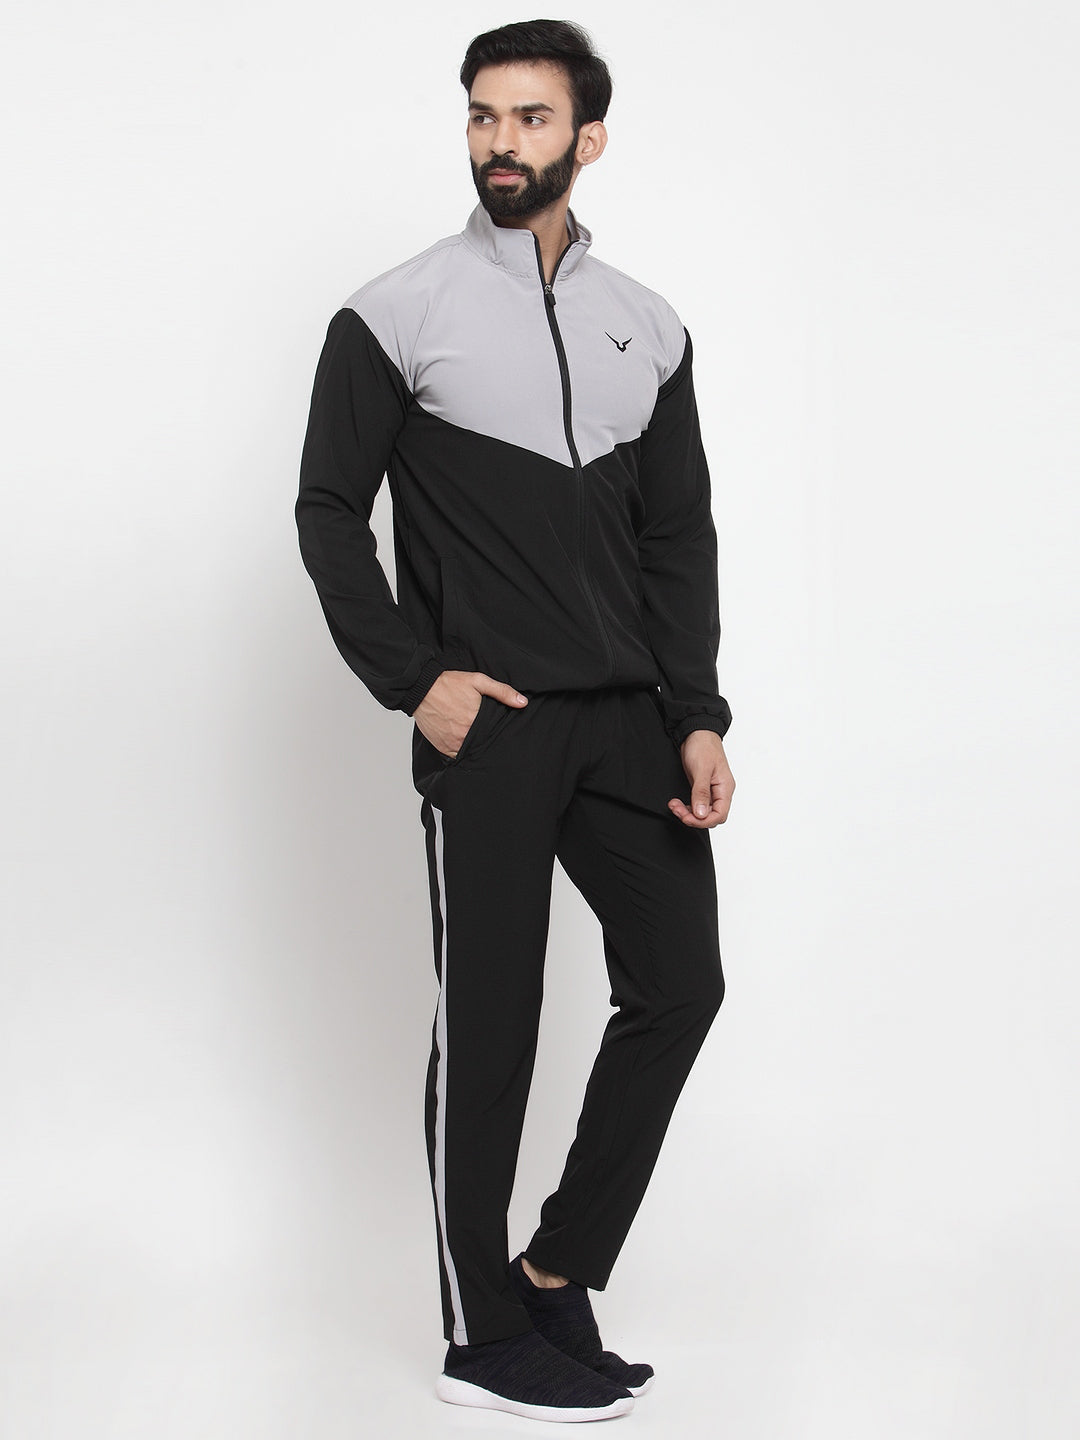 Invincible Men's Light Weight Lounge Tracksuit